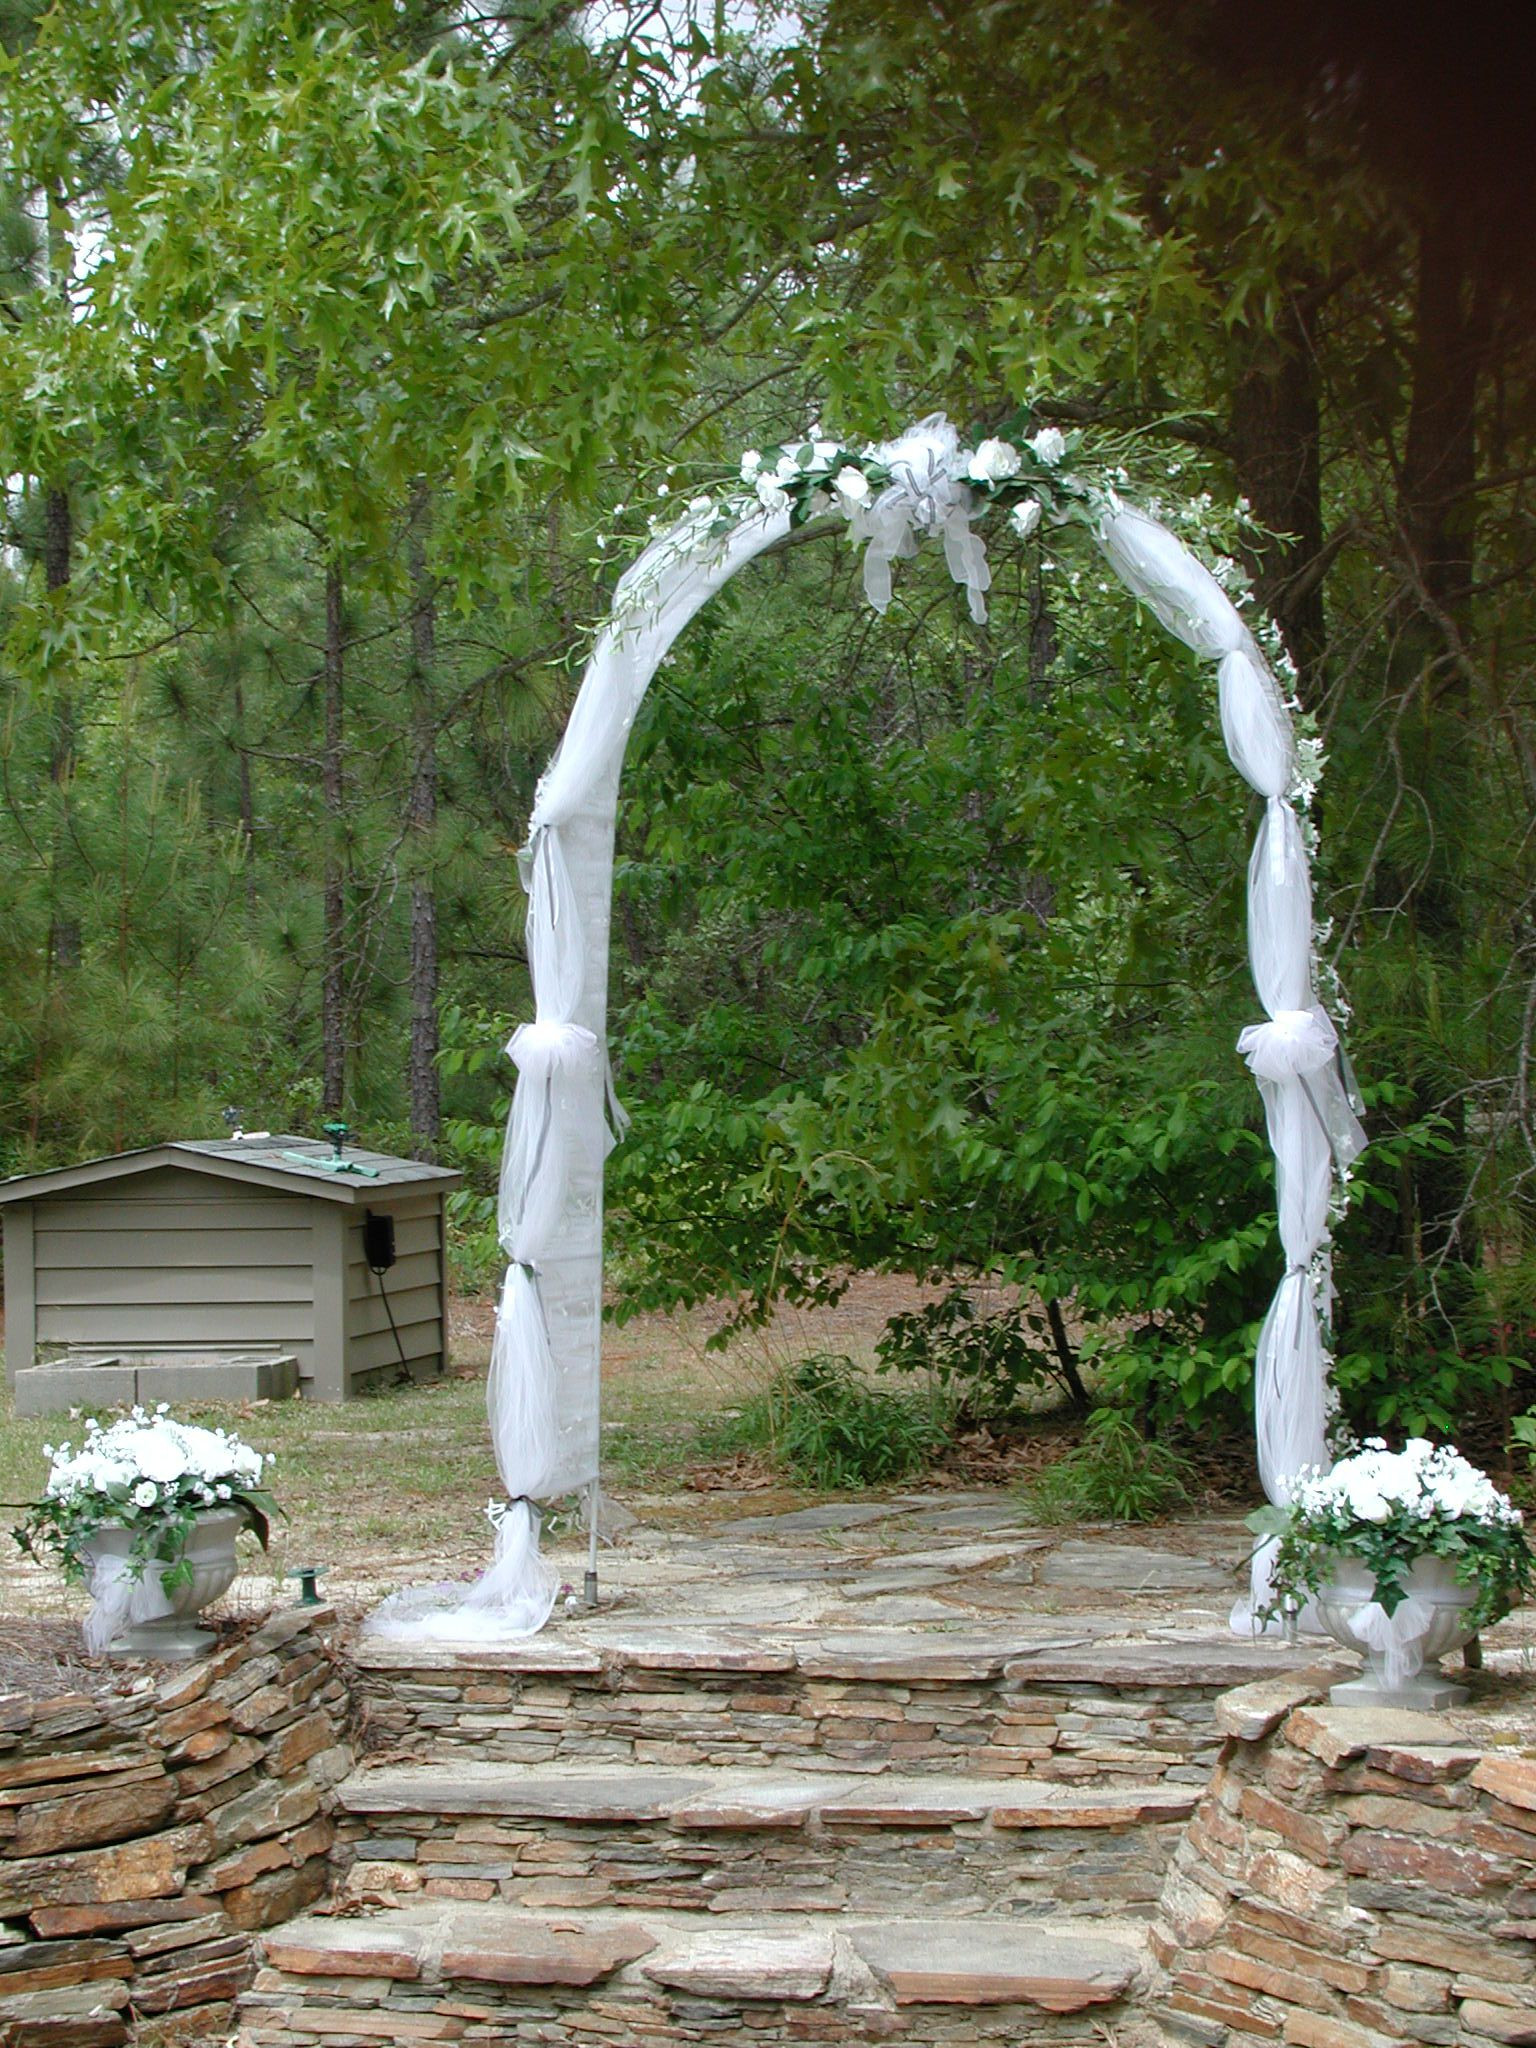 How To Decorate A Wedding Arch With Fabric
 wedding arch with fabric draping maybe with something